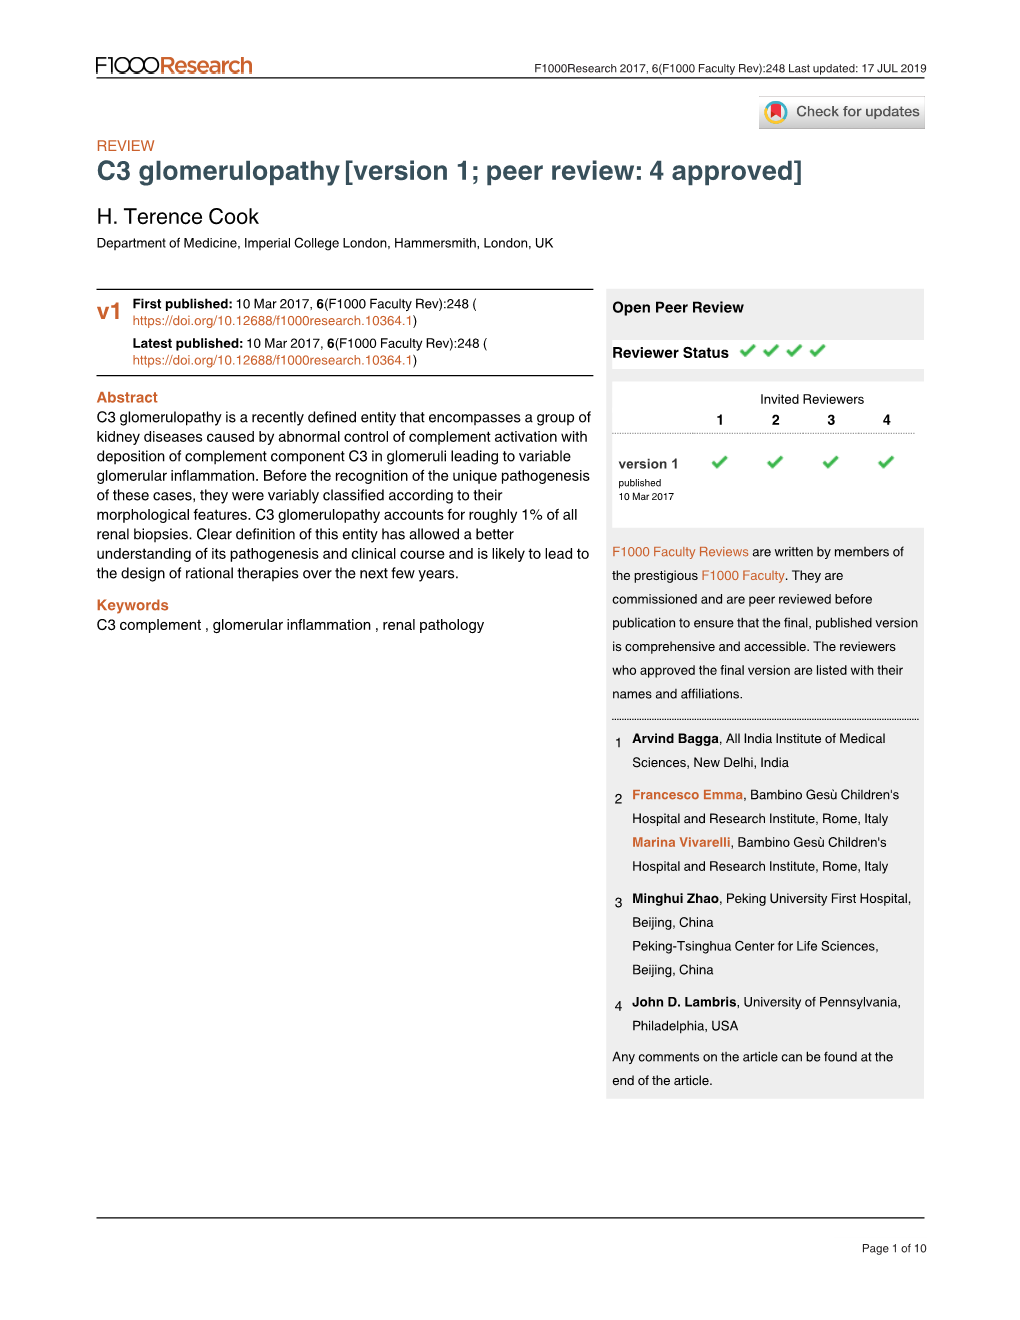 C3 Glomerulopathy[Version 1; Peer Review: 4 Approved]